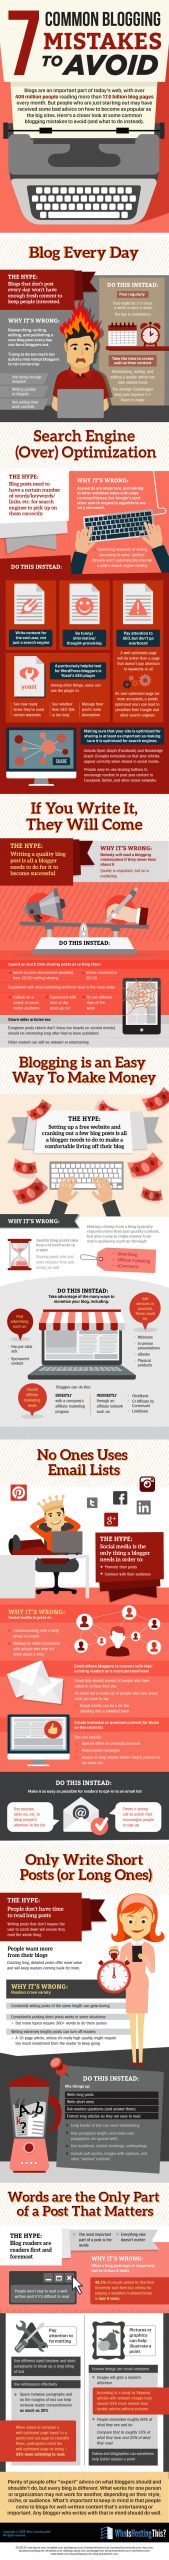 , 7 Common Blogging Mistakes That Can Cost You Readers and Subscribers [Infographic], TornCRM